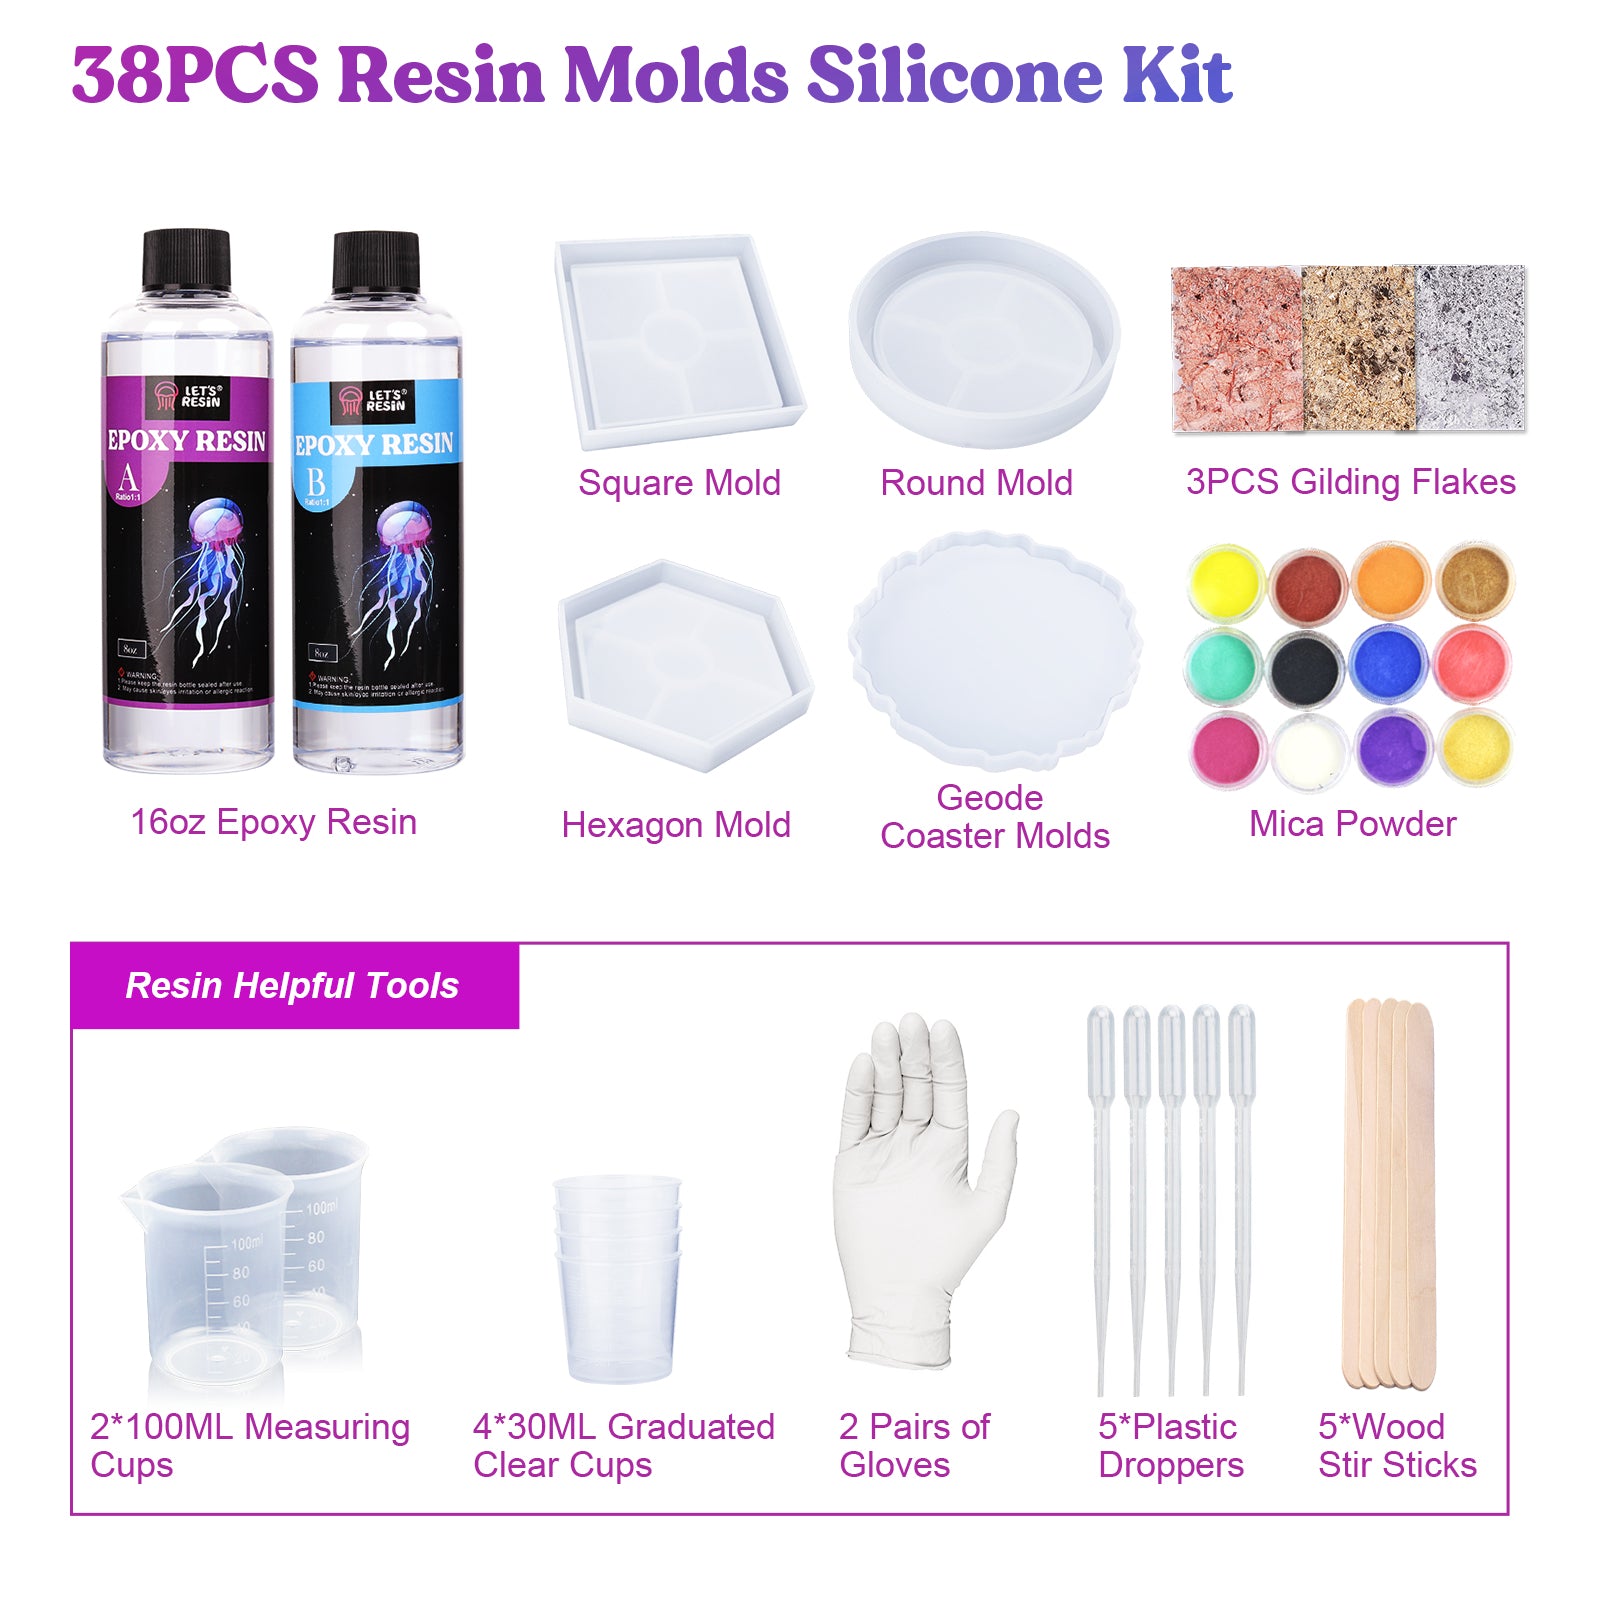  LET'S RESIN Polyurethane Resin, 60oz 2 Part Casting Resin, Fast  Cured Resin within 10 Minutes, Ultra Low Viscosity & Low Odor Pourable  Liquid Plastic for Casting Models, Prototypes & Other Resin